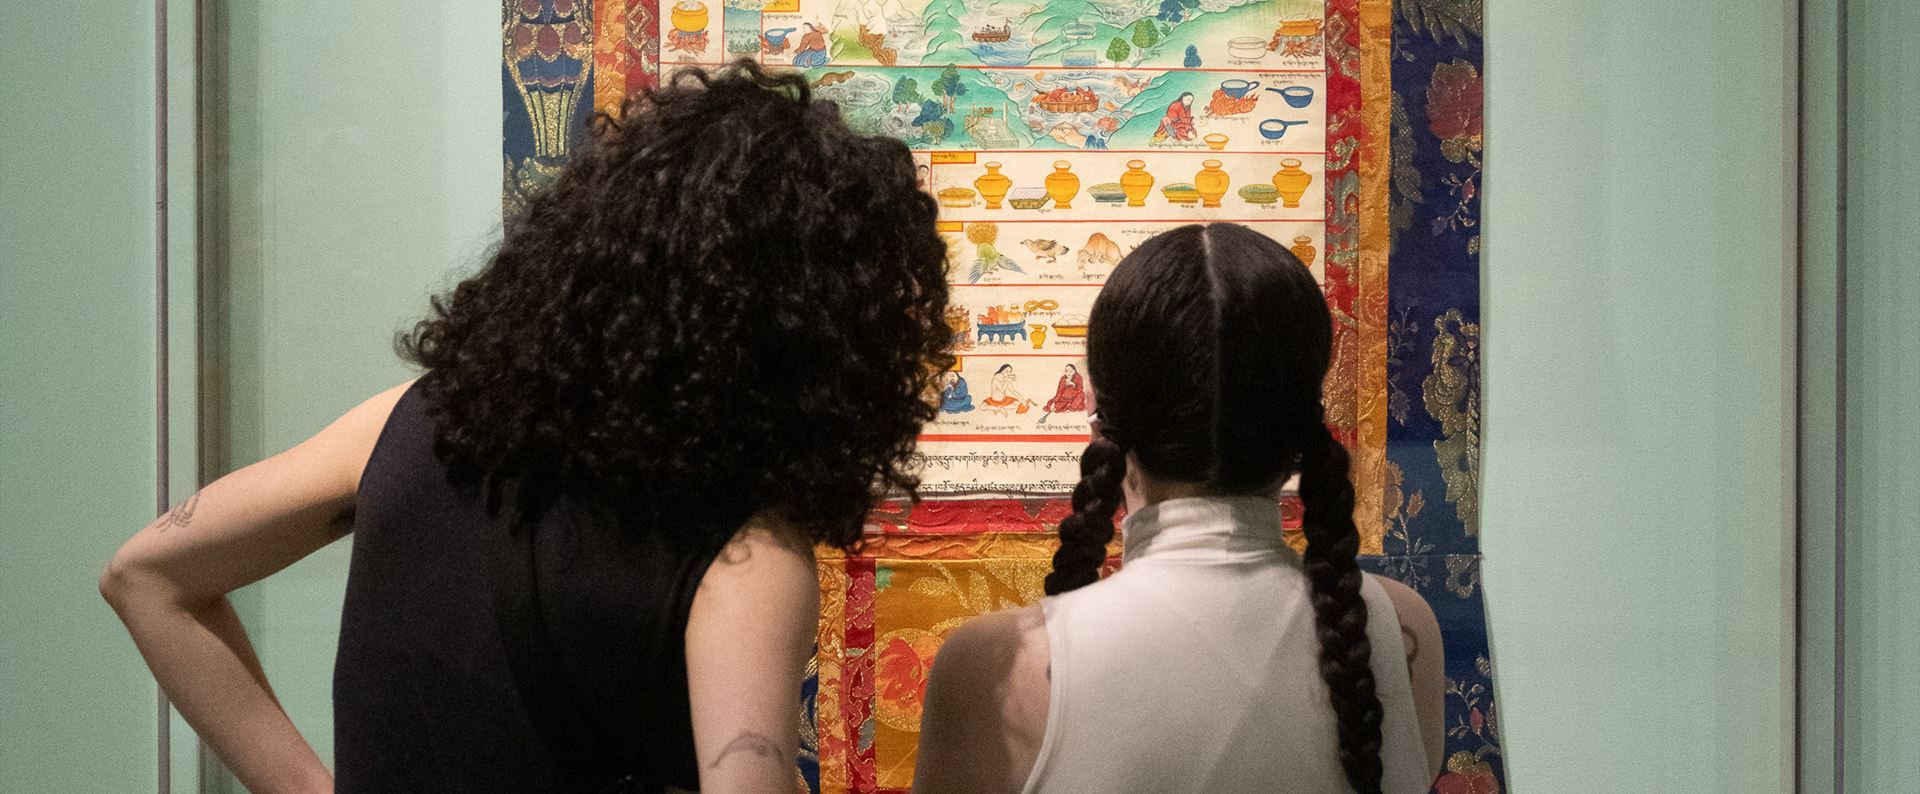 Two people looking at artwork that’s hanging on a wall